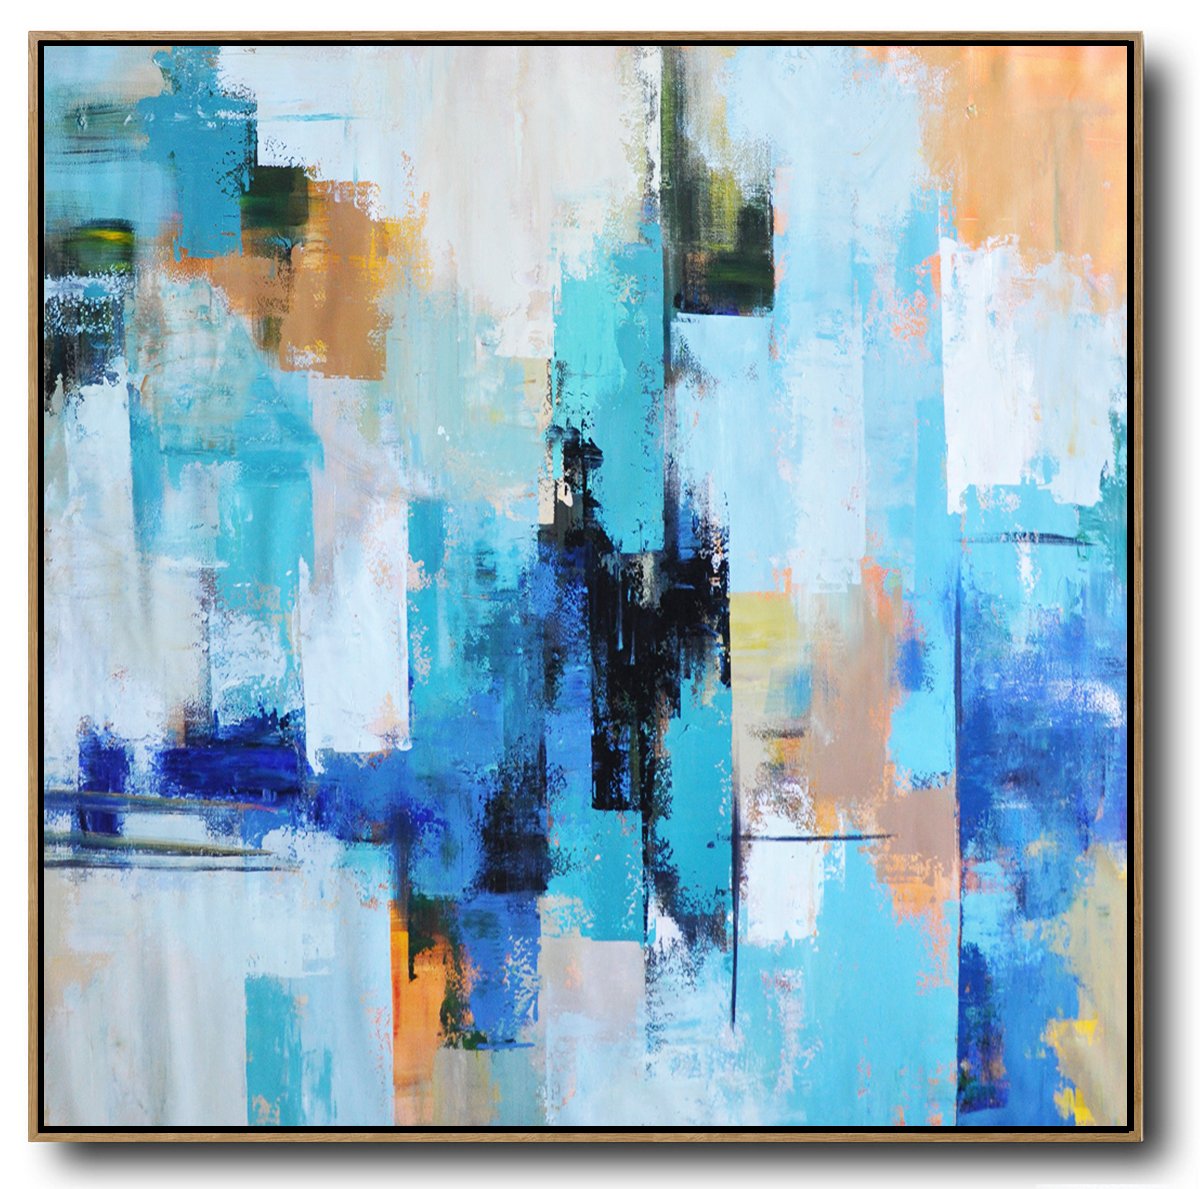 Extra Large Abstract Painting On Canvas,Palette Knife Contemporary Art Canvas Painting,Large Oil Canvas Art,Sky Blue,Yellow,White,Blue.etc